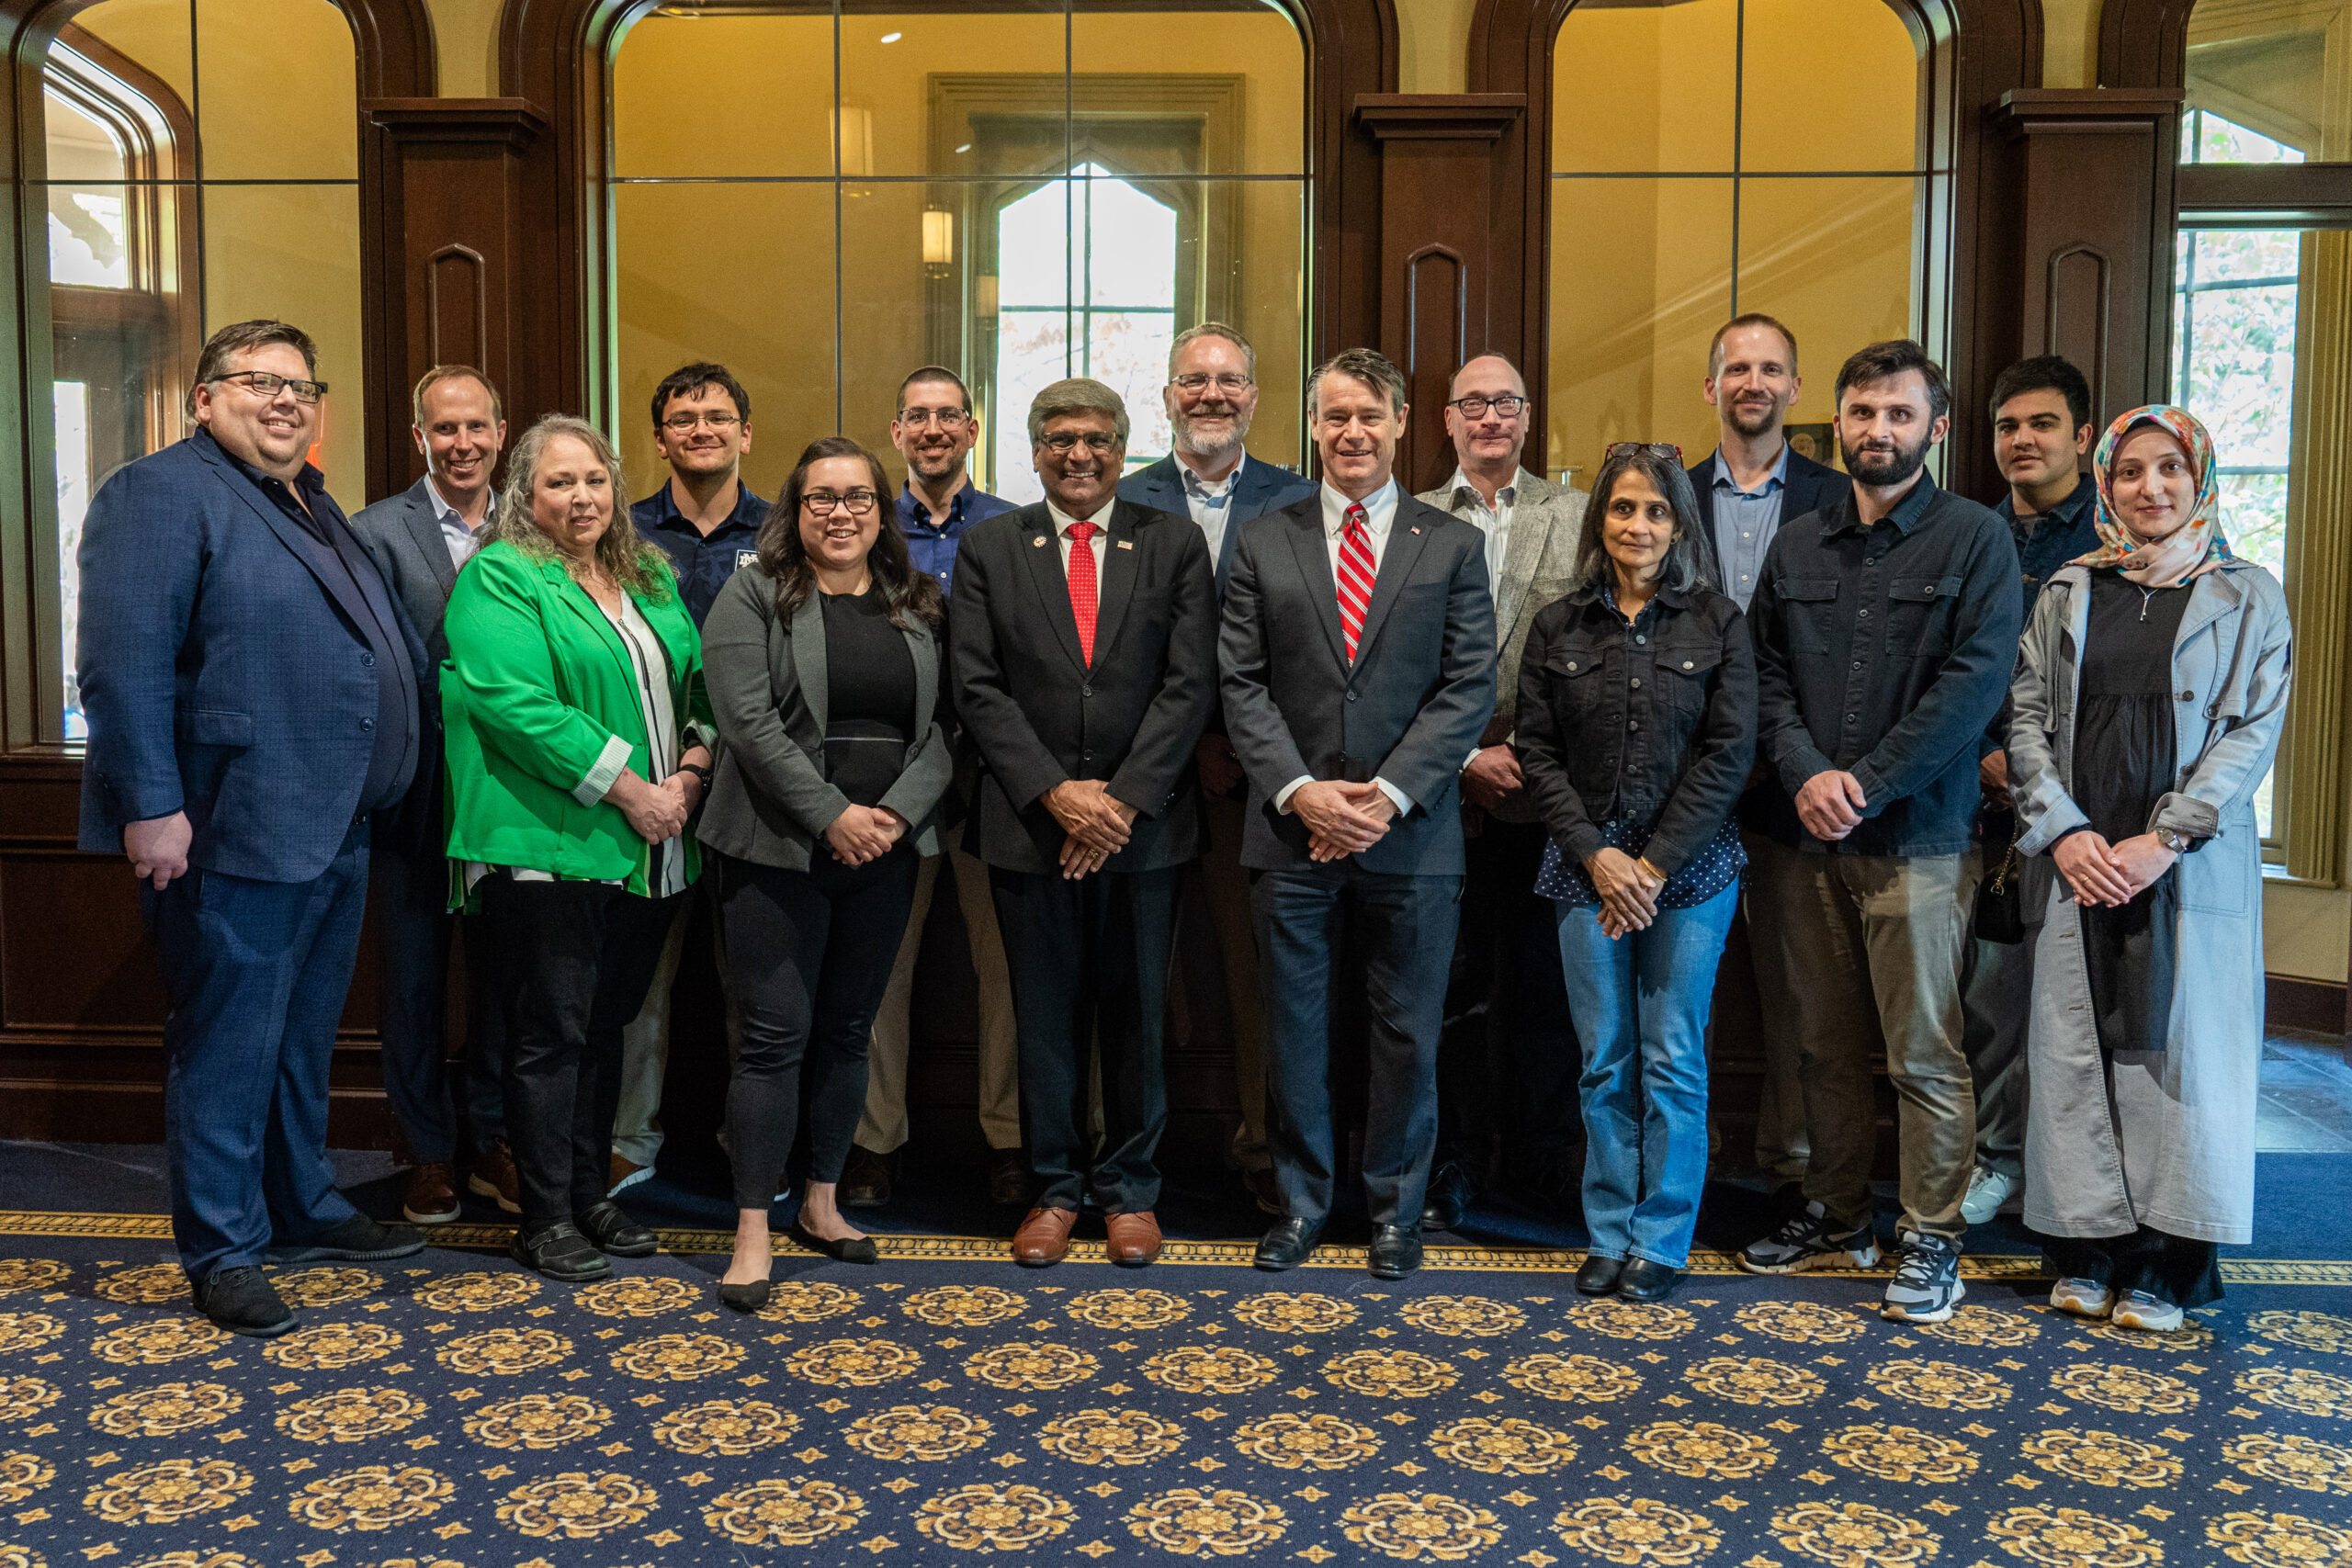 Senator Todd Young and NSF Director Sethuraman Panchanathan visit Notre Dame, SpectrumX leadership, to discuss critical investments in science and technology